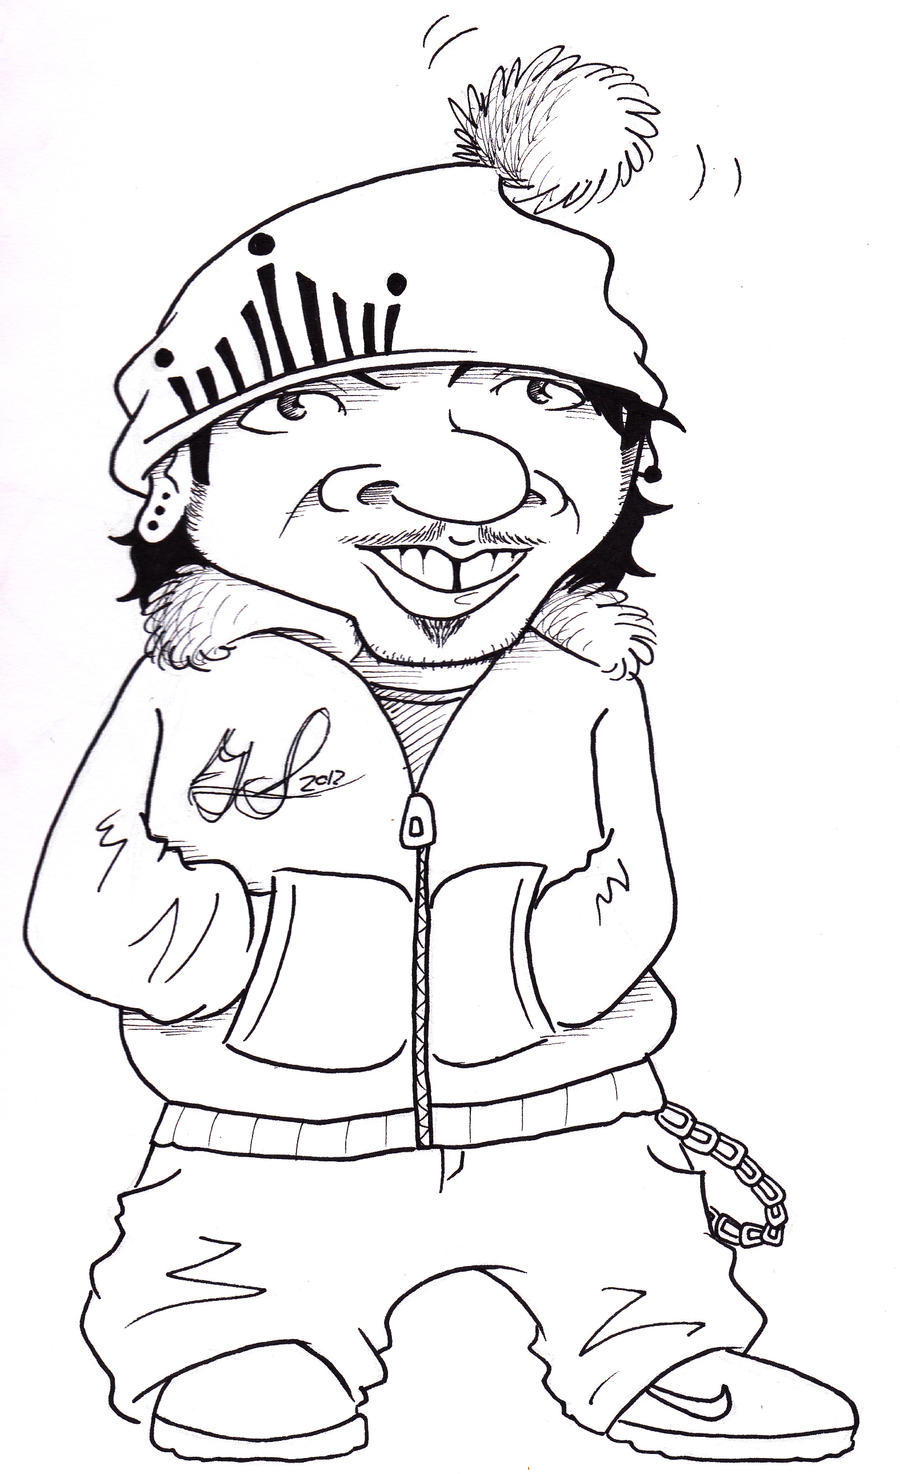 gangster cartoon characters coloring pages - photo #11